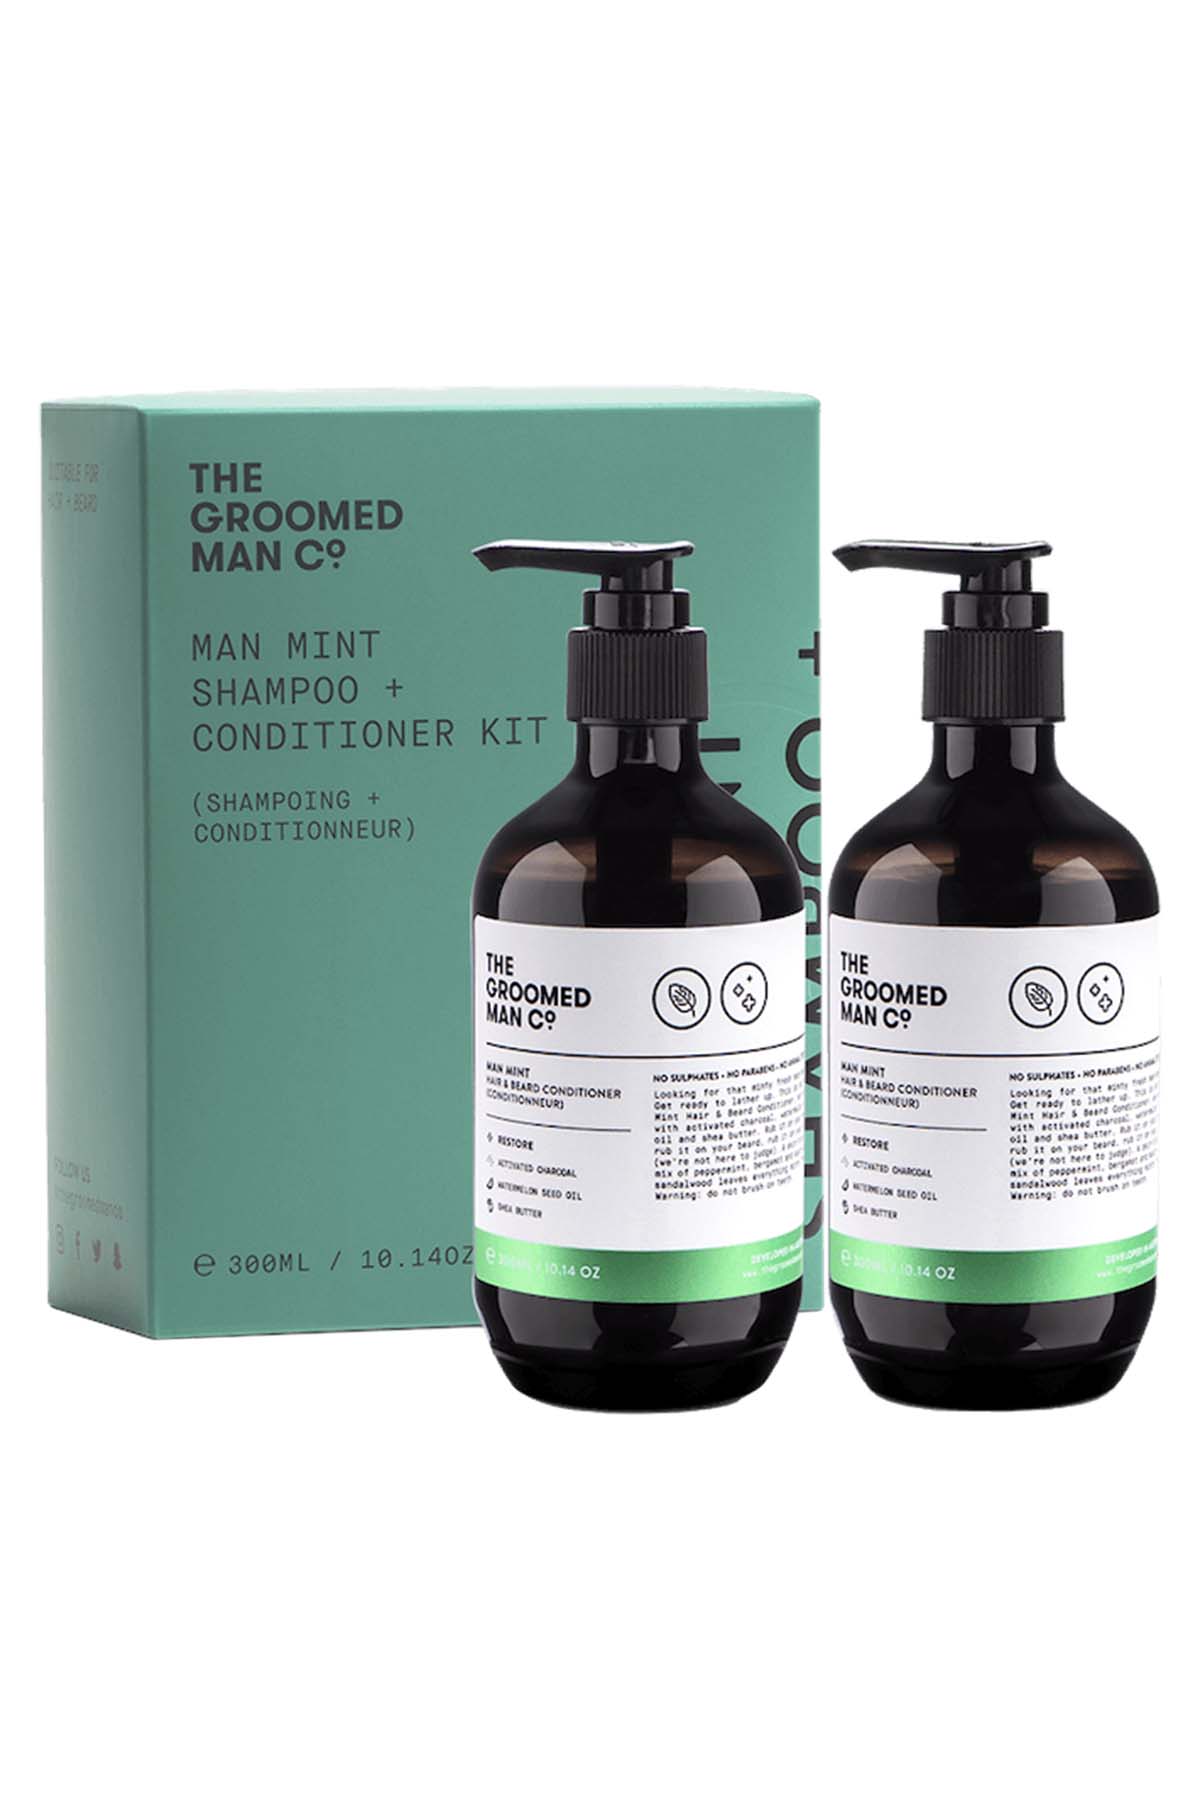 The Groomed Man Co. Man Mint Shampoo and Conditioner Set